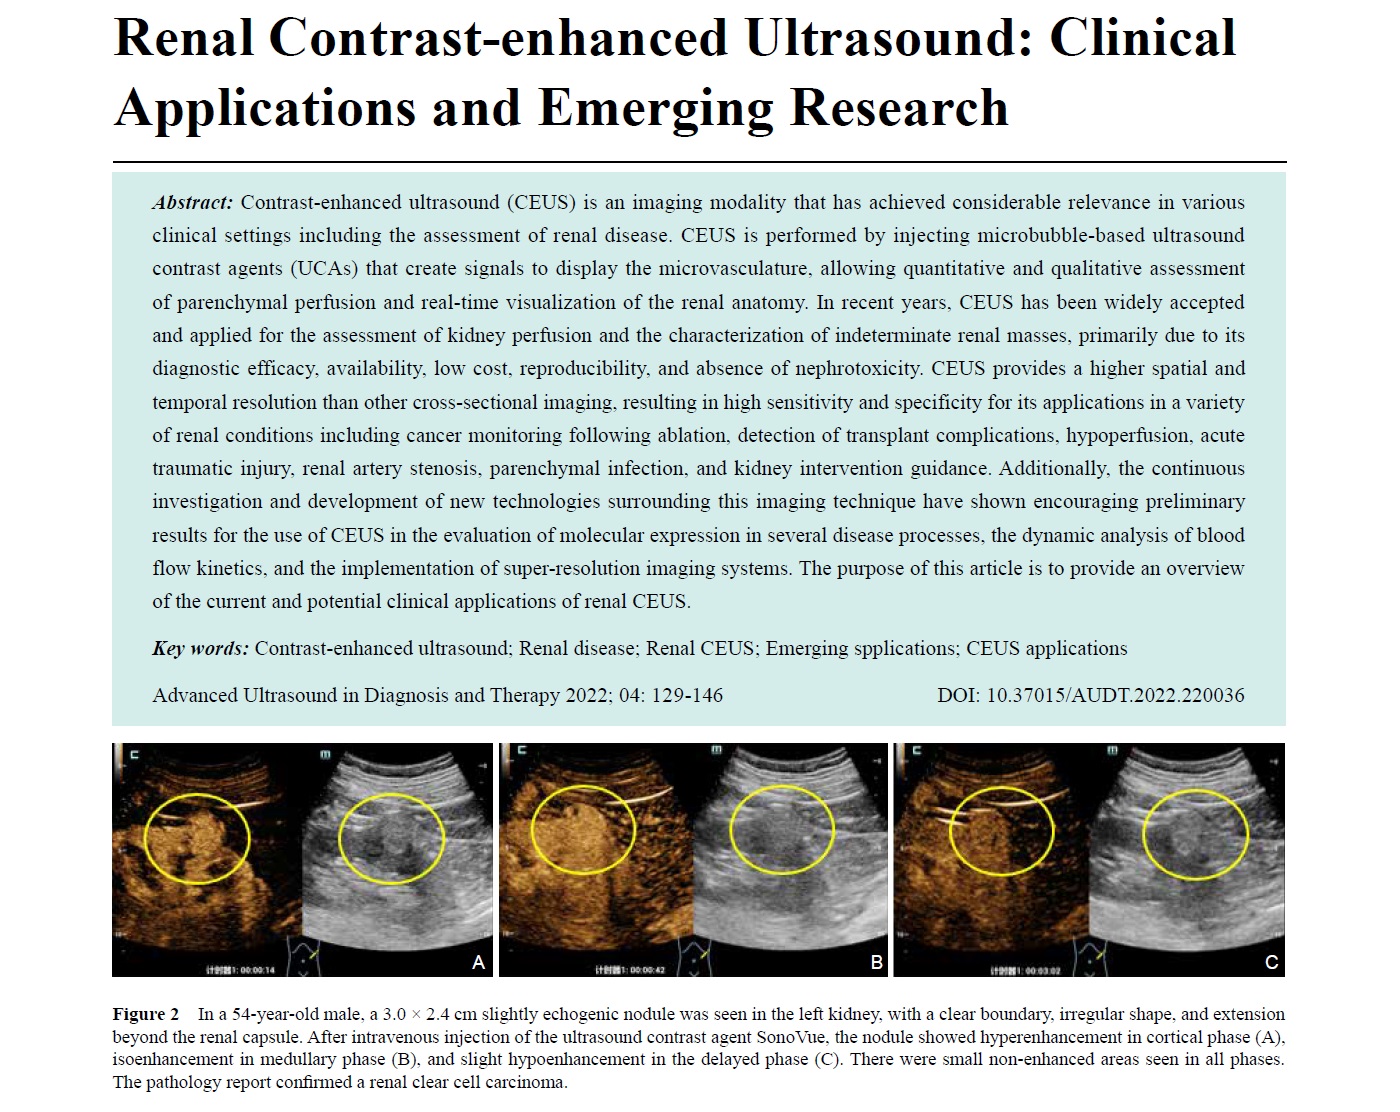 Renal Contrast-enhanced Ultrasound: Clinical Applications and Emerging Research